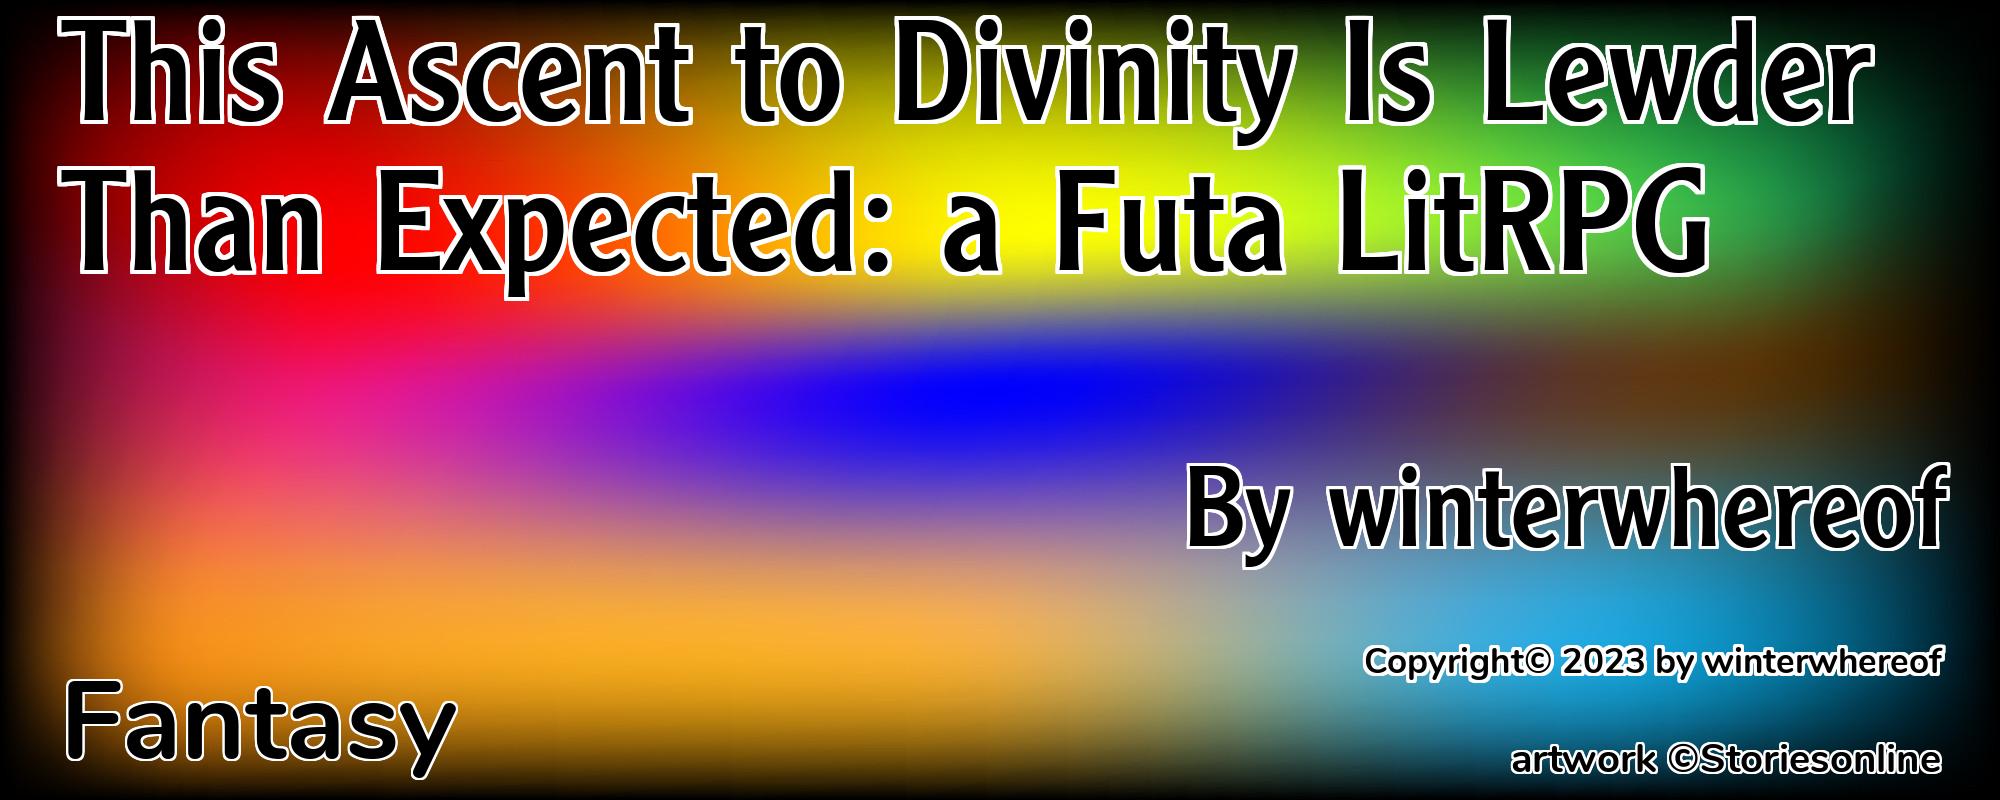 This Ascent to Divinity Is Lewder Than Expected: a Futa LitRPG - Cover